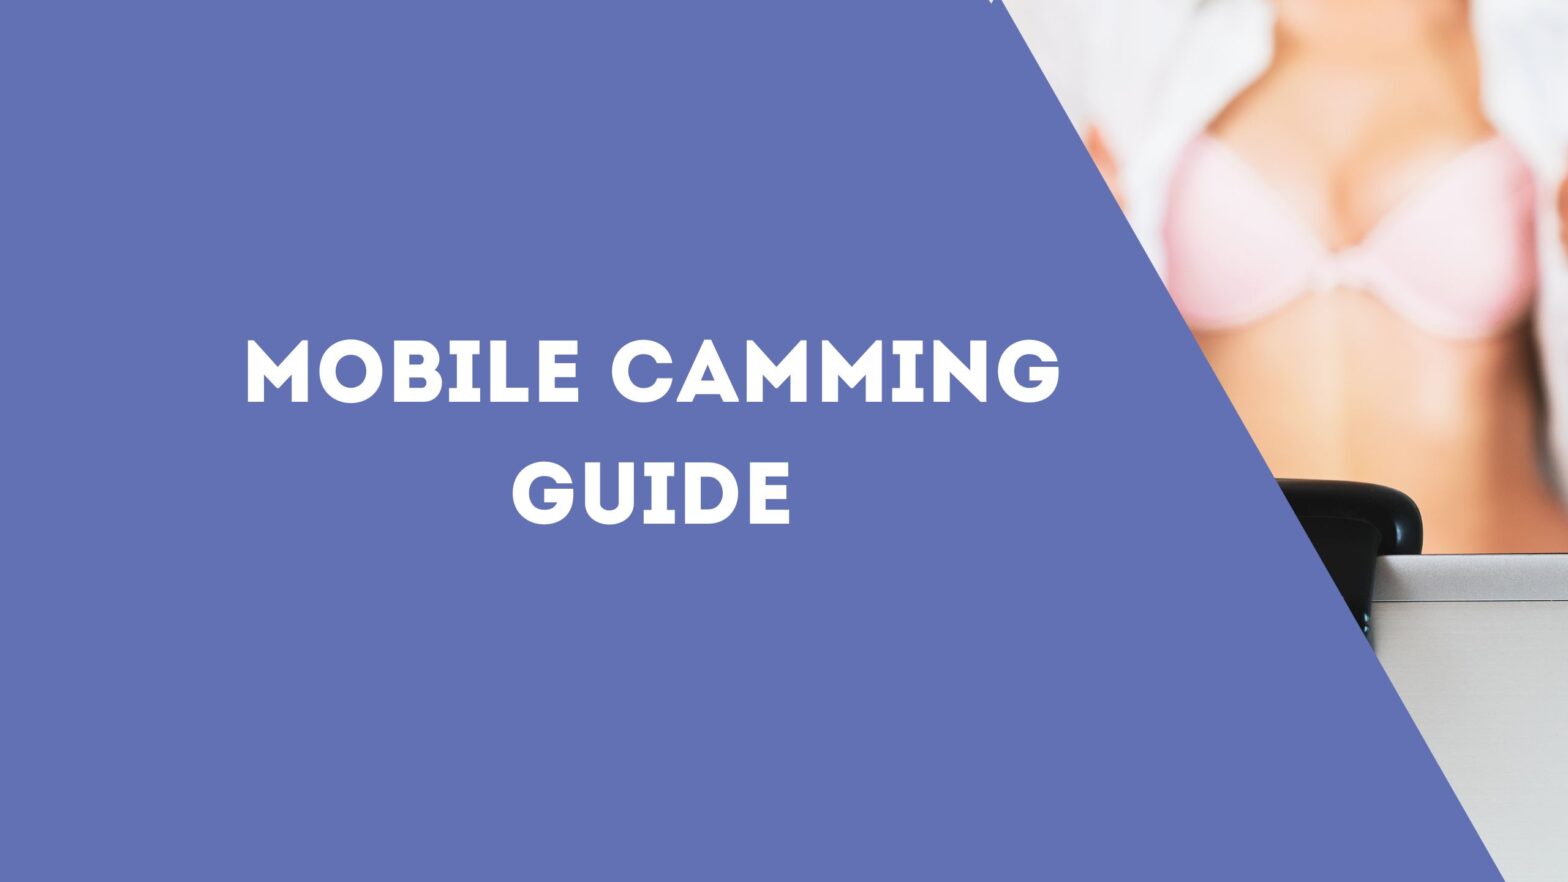 Mobile Camming Guide